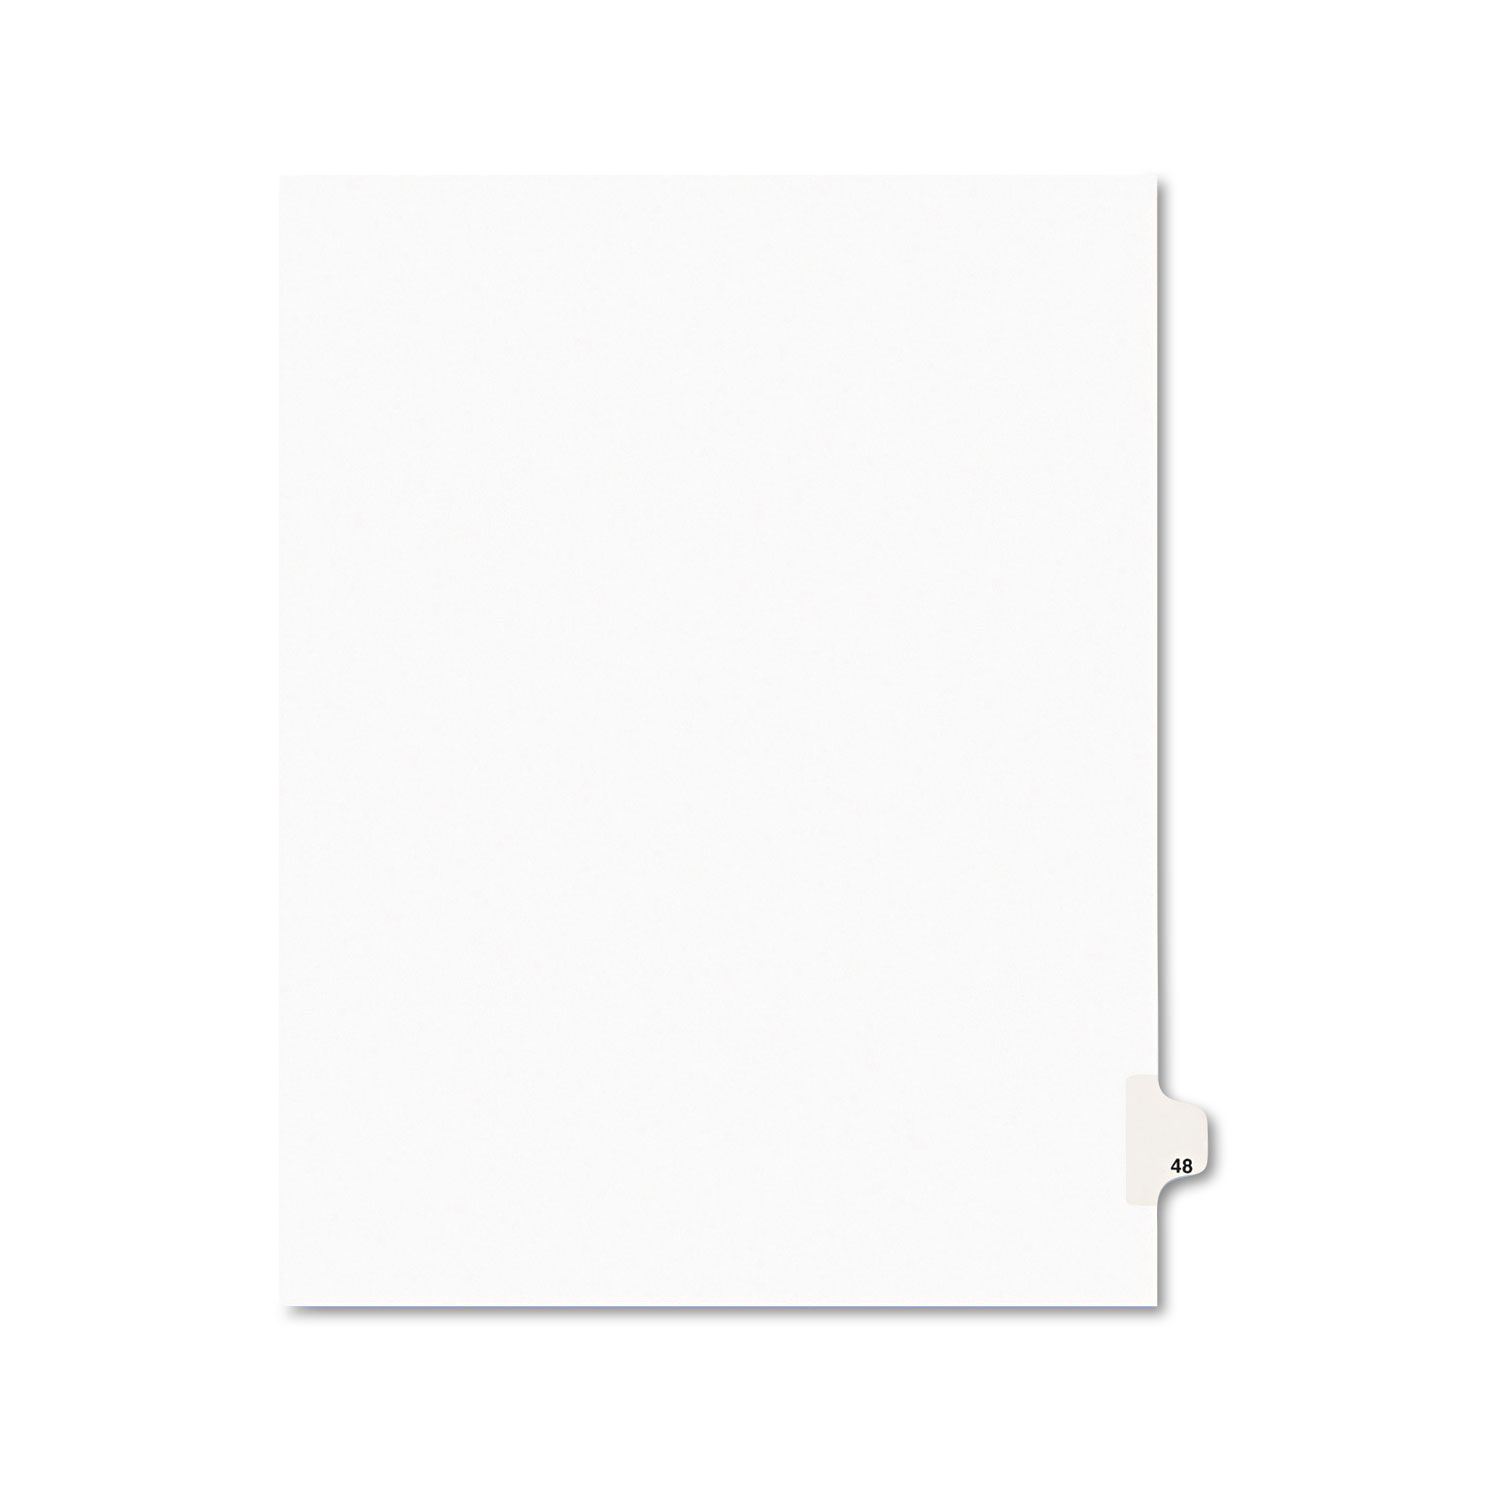  Avery 01048 Preprinted Legal Exhibit Side Tab Index Dividers, Avery Style, 10-Tab, 48, 11 x 8.5, White, 25/Pack (AVE01048) 